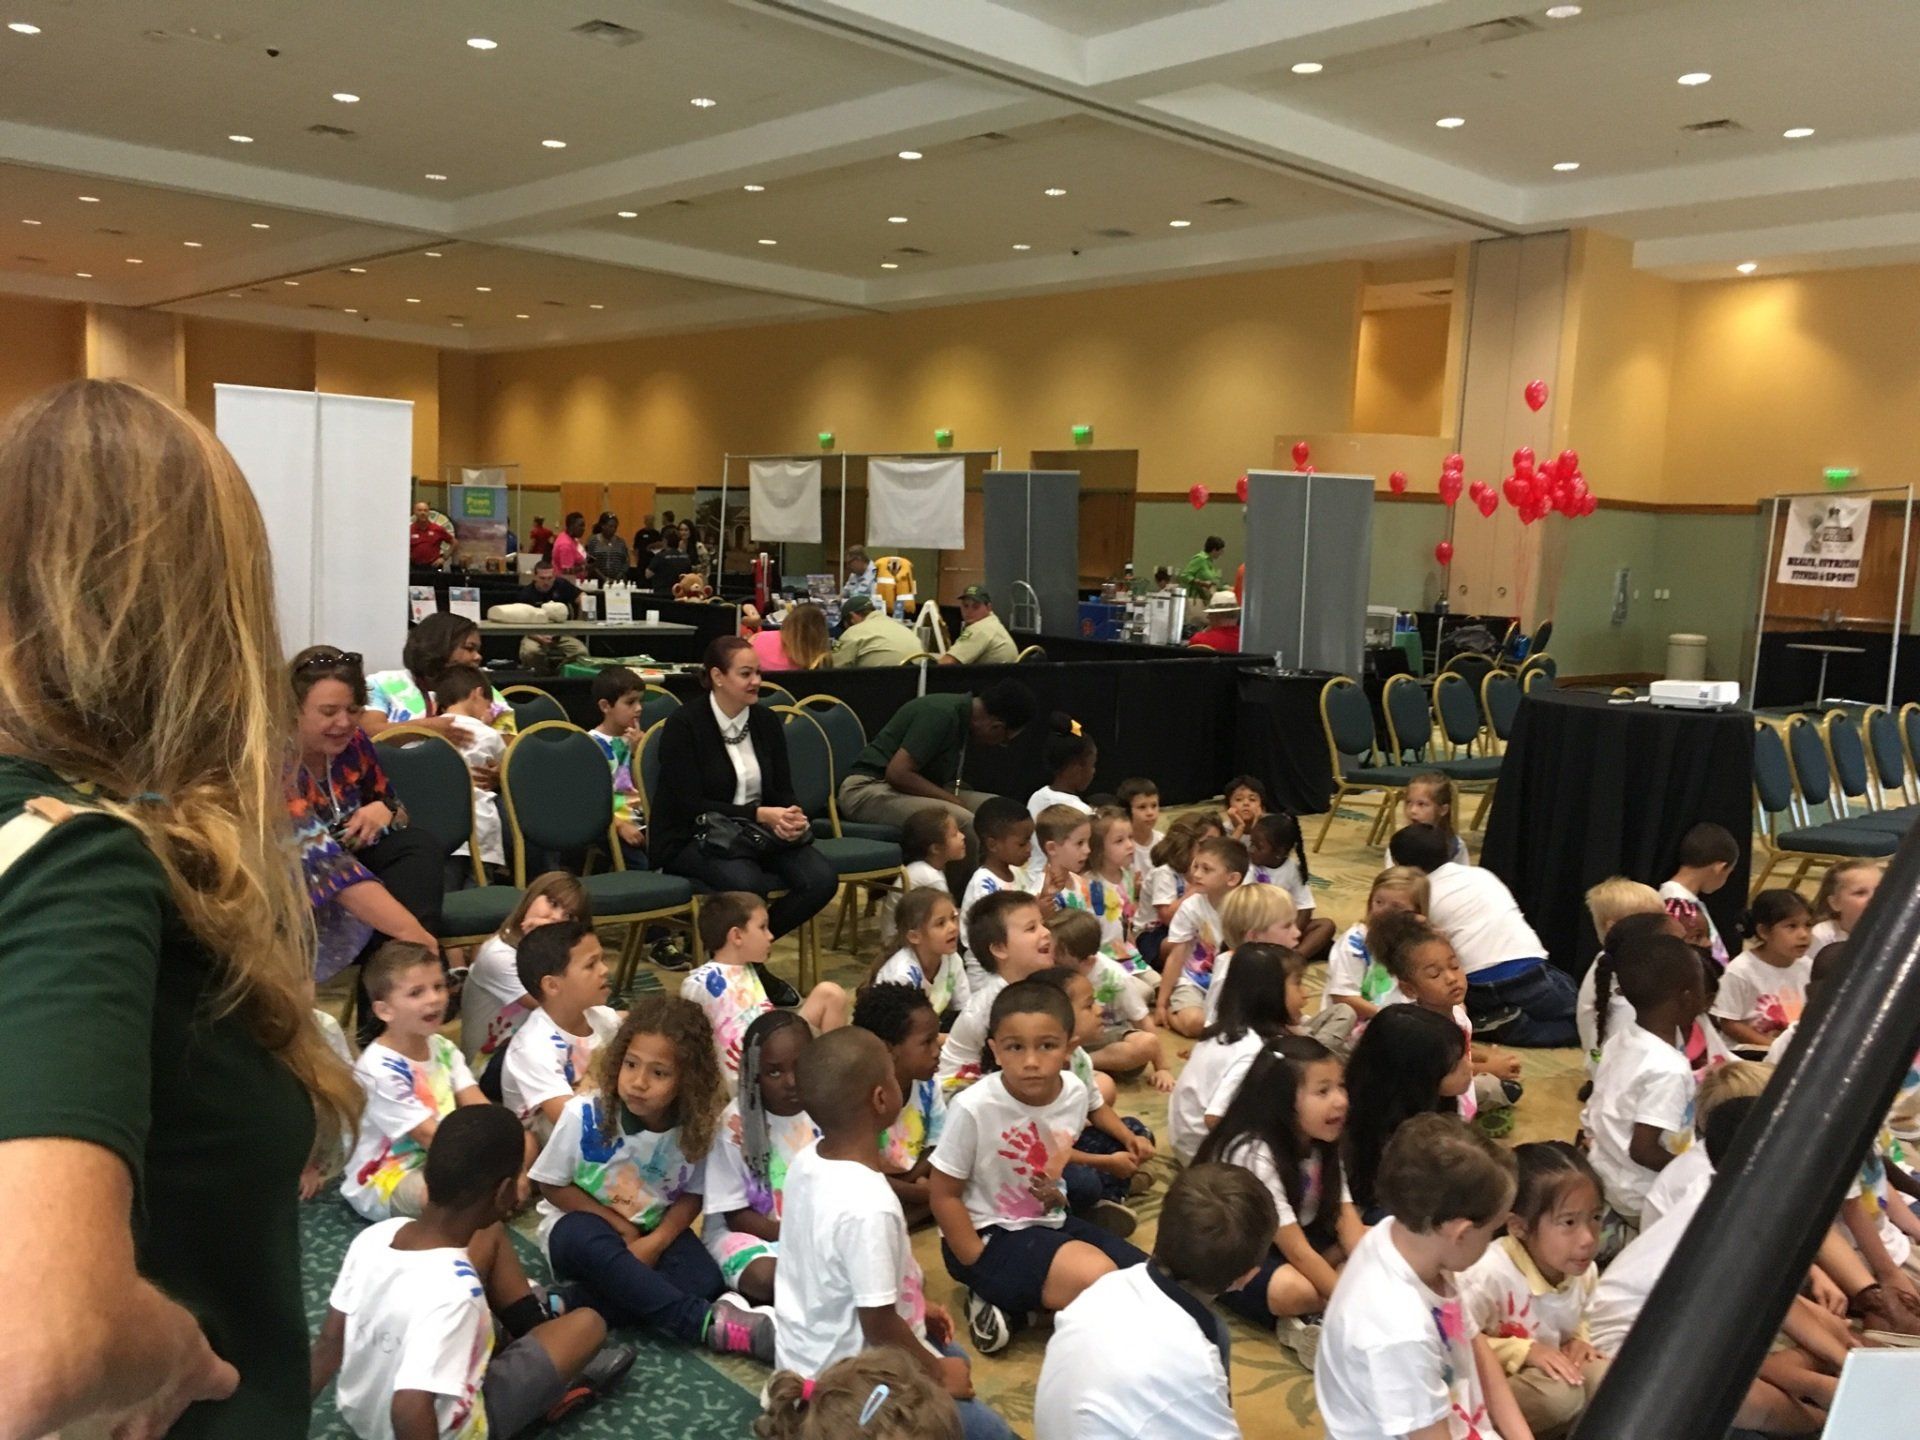 Children getting ready to hear and see a new story from one of the National Authors at the Buddy Bear® Den's Main Stage!